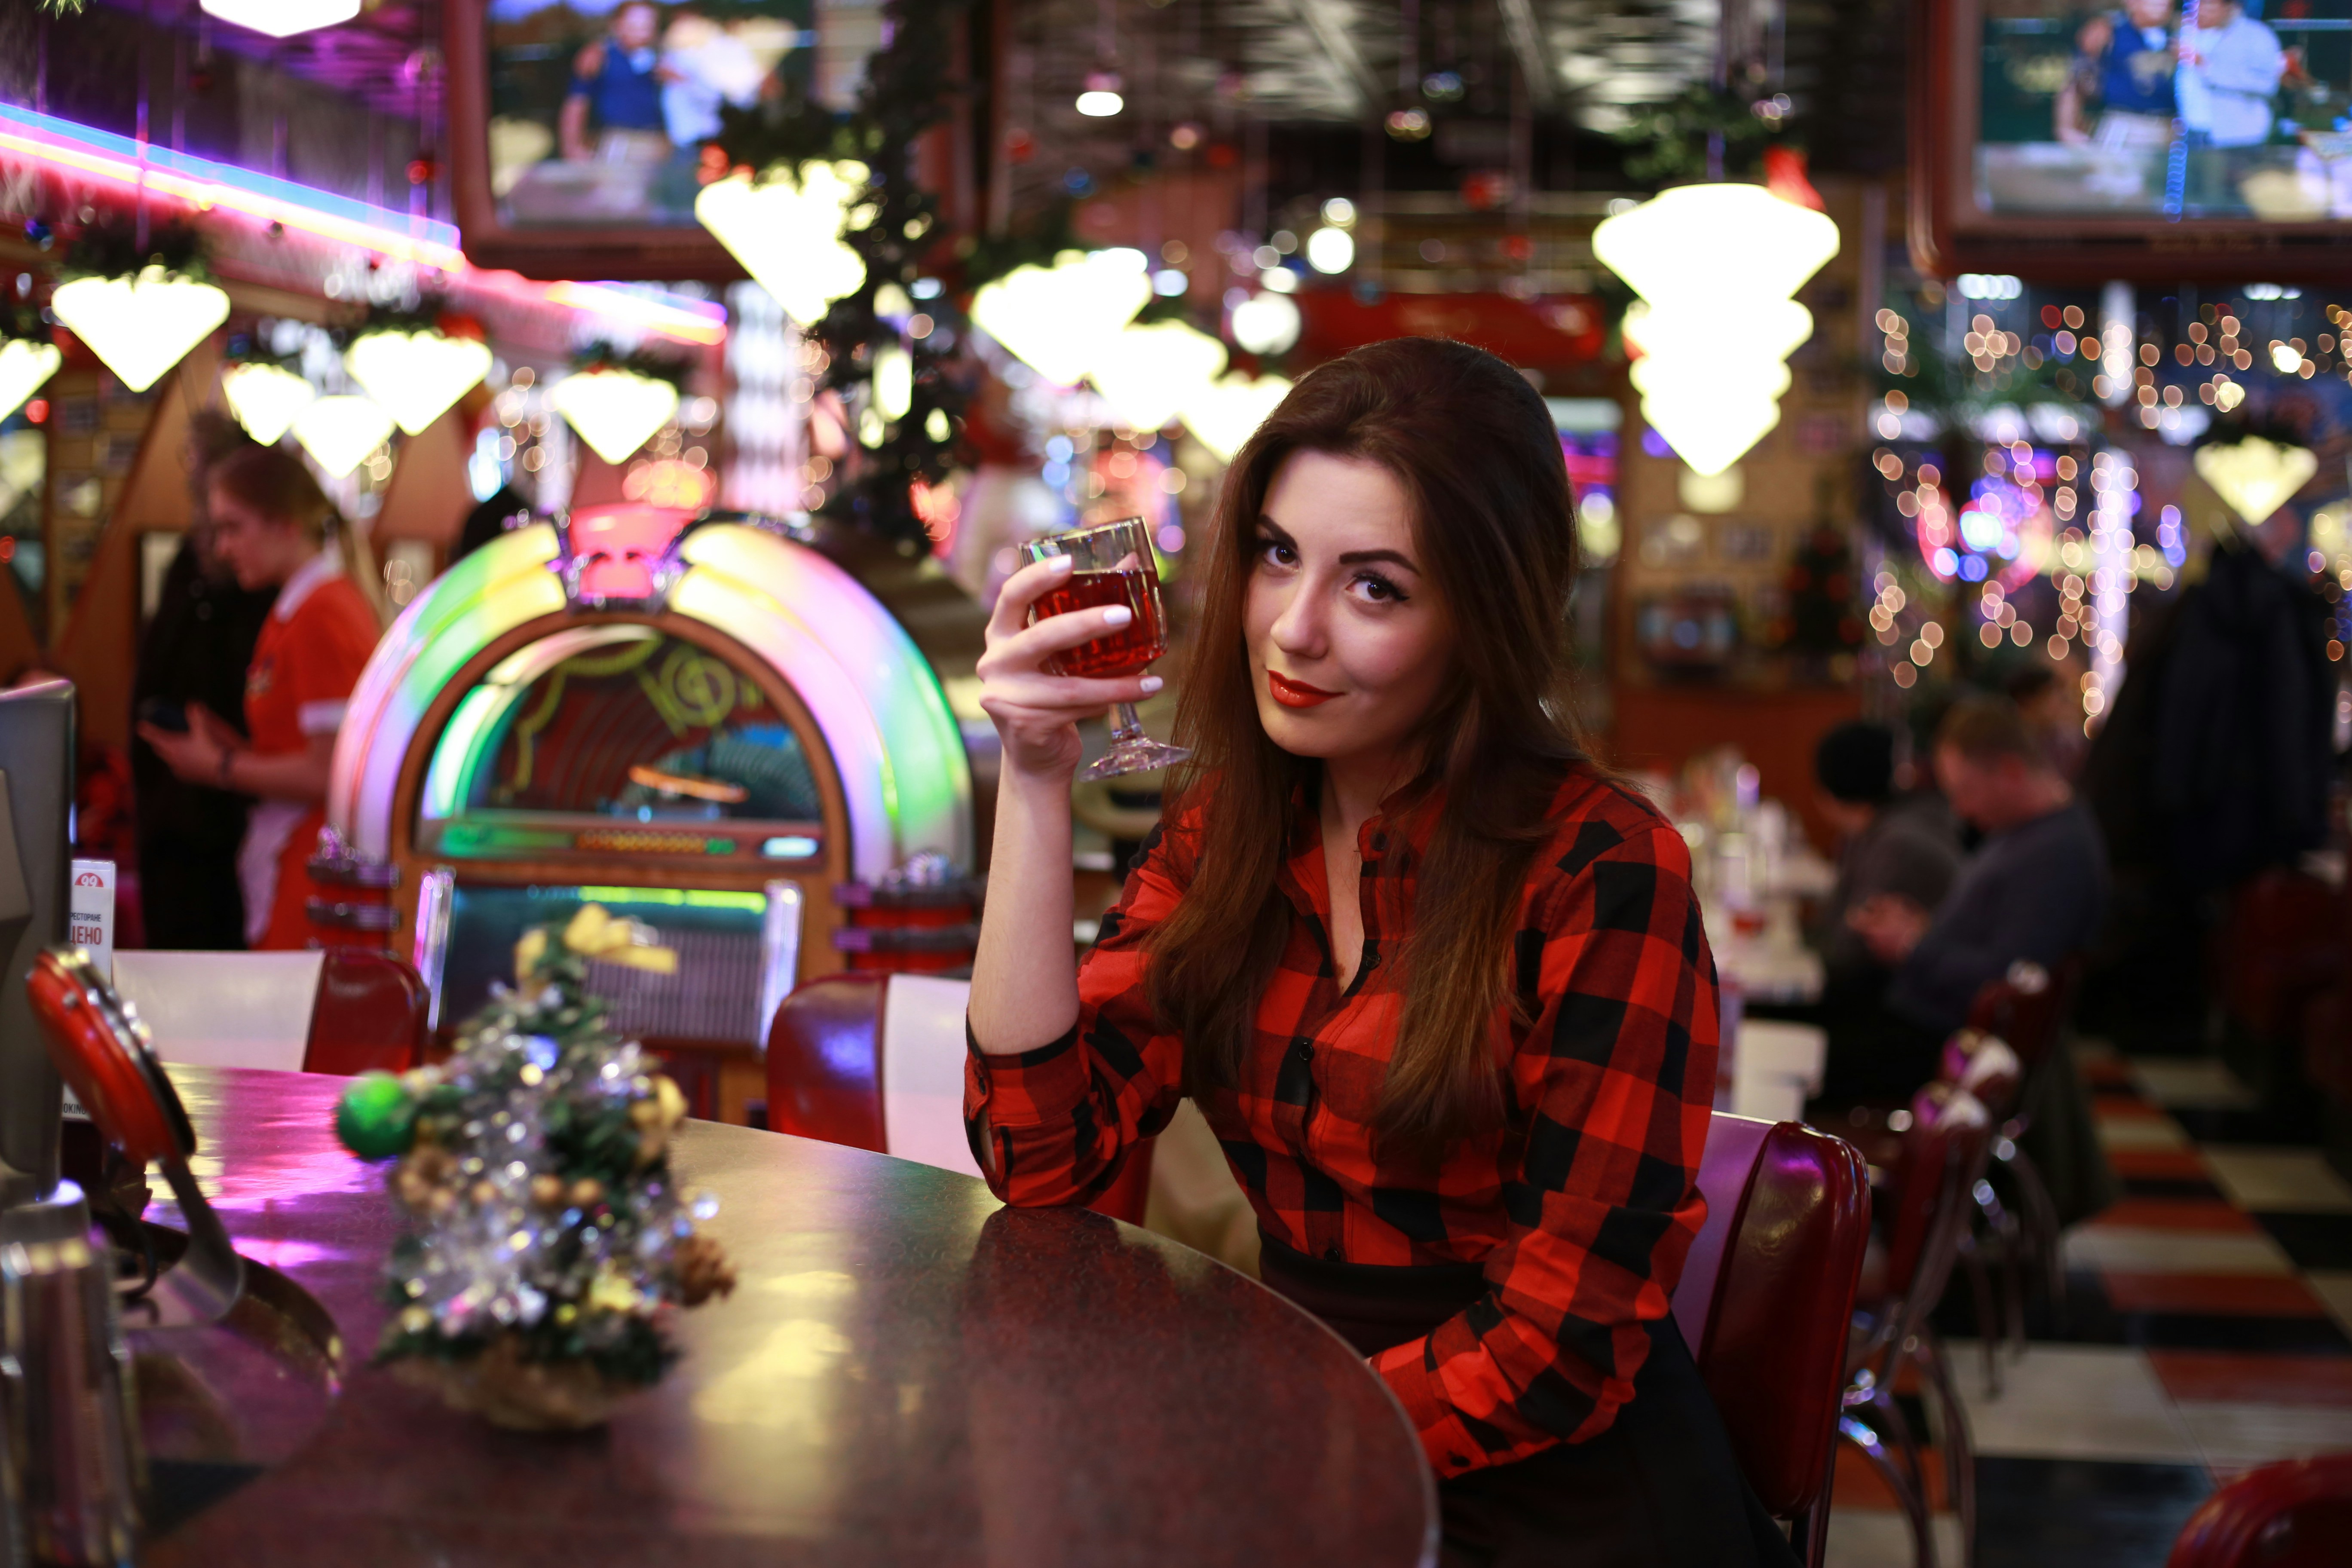 a young girl in a red plaid shirt with glass at the bar in diner. say 